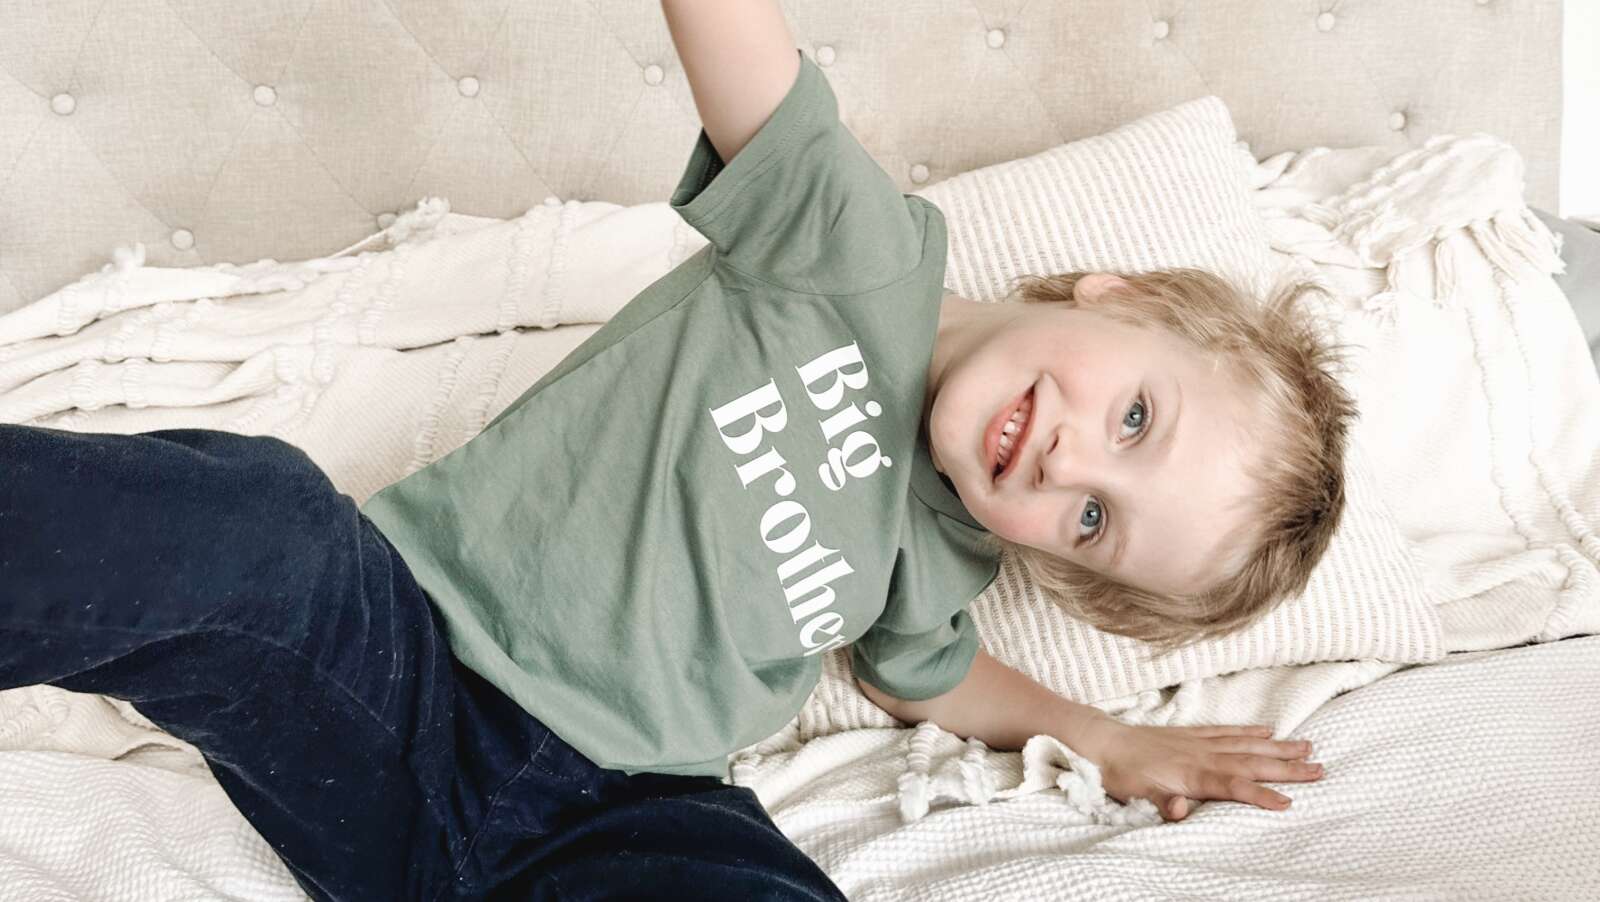 A preschooler playfully sits on a bed wearing navy trousers and a green tee shirt. His head is turned to the side, with his blue eyes looking into the camera.